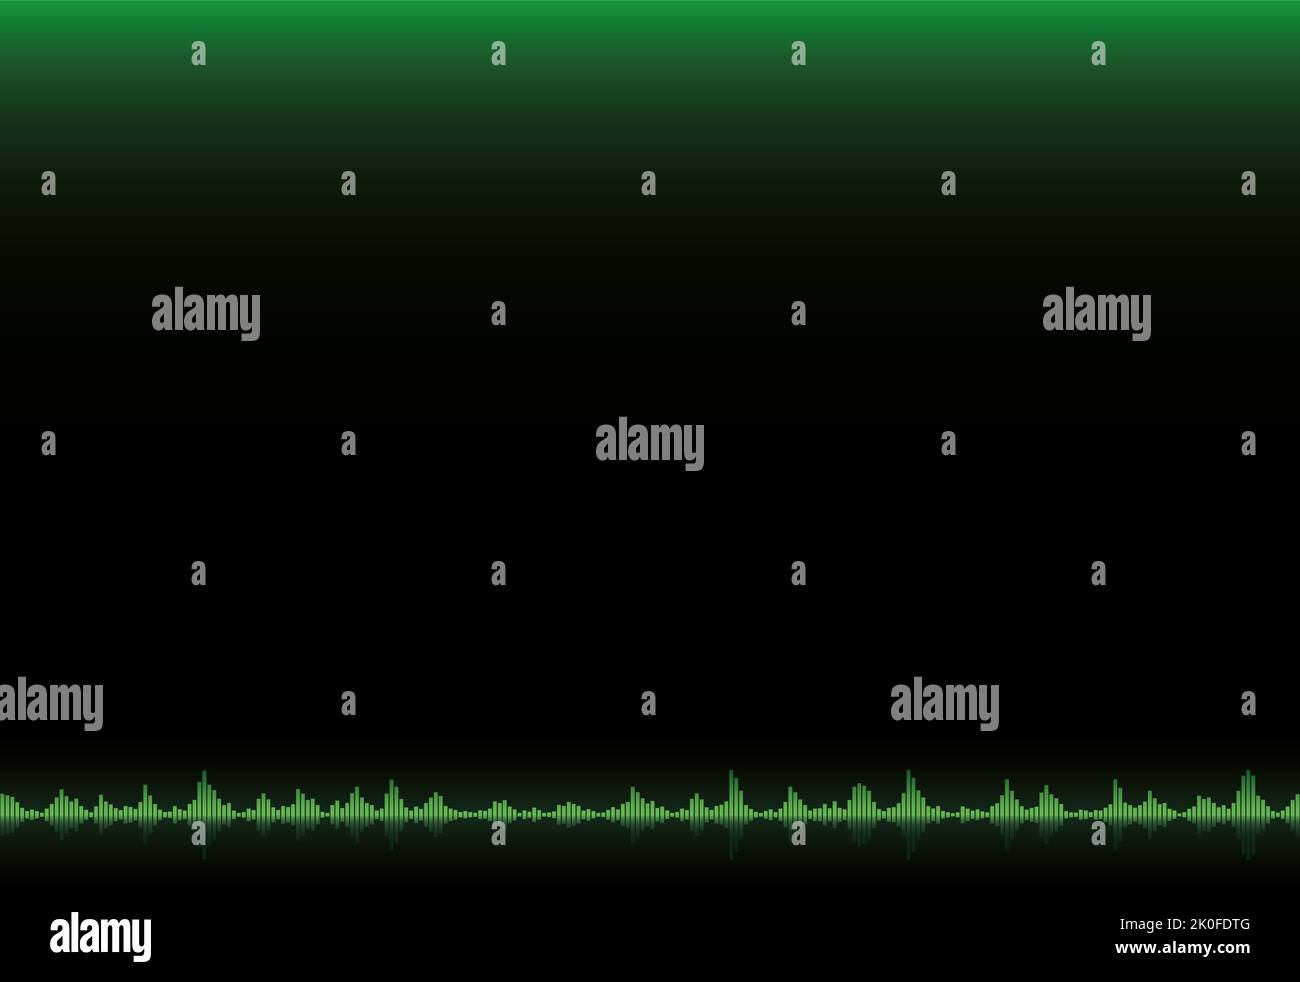 Equalizer bars, green soundwave amplitude, volume level wave, audio frequency scale on green and black gradient background. Stock Photo